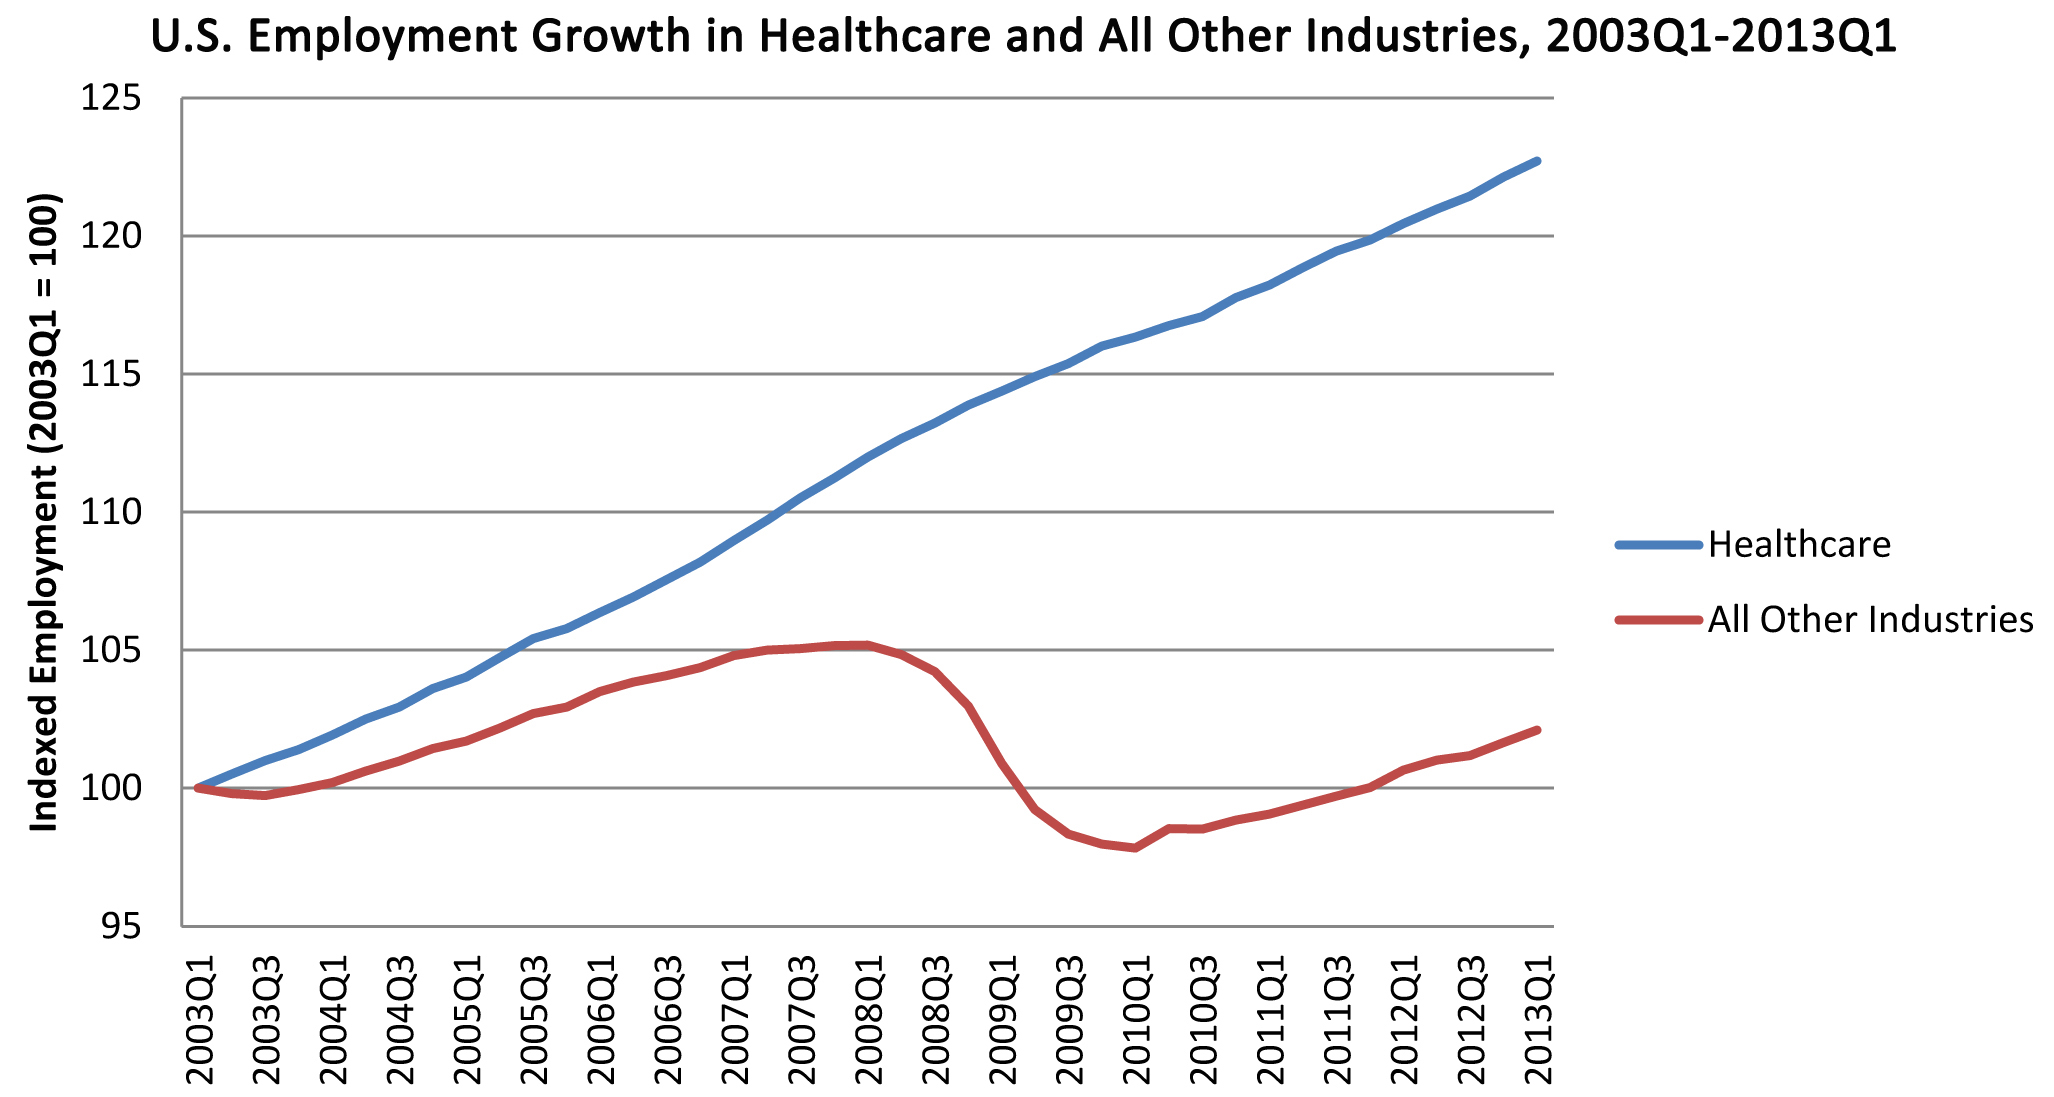 changes in the healthcare industry over the last 10 years